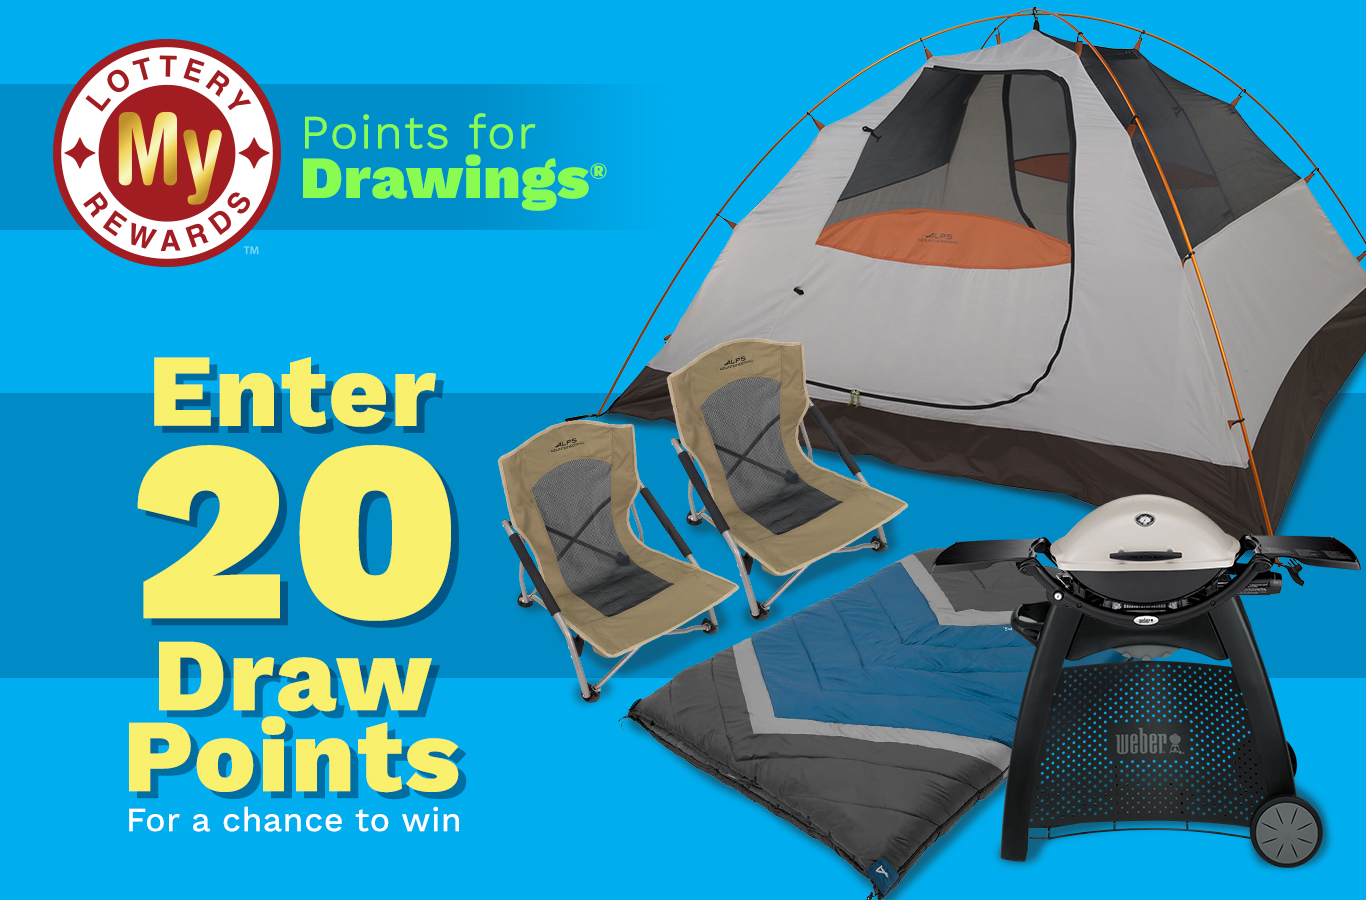 Here's your chance to win a Camping for Two Prize! Enter by Sunday, June 5th.